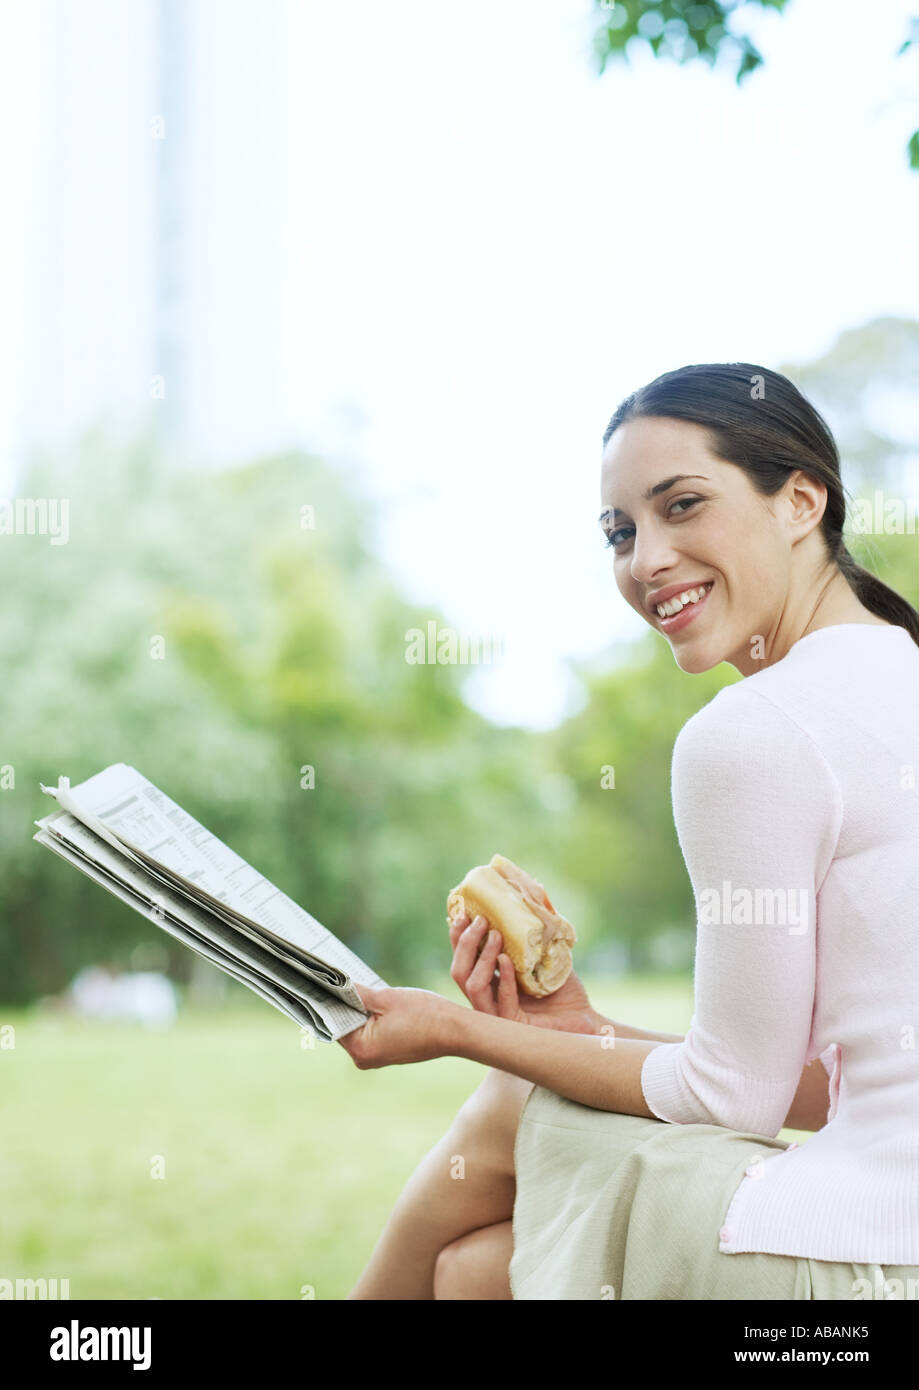 Young woman reading newspaper and eating sandwich in city park Stock Photo